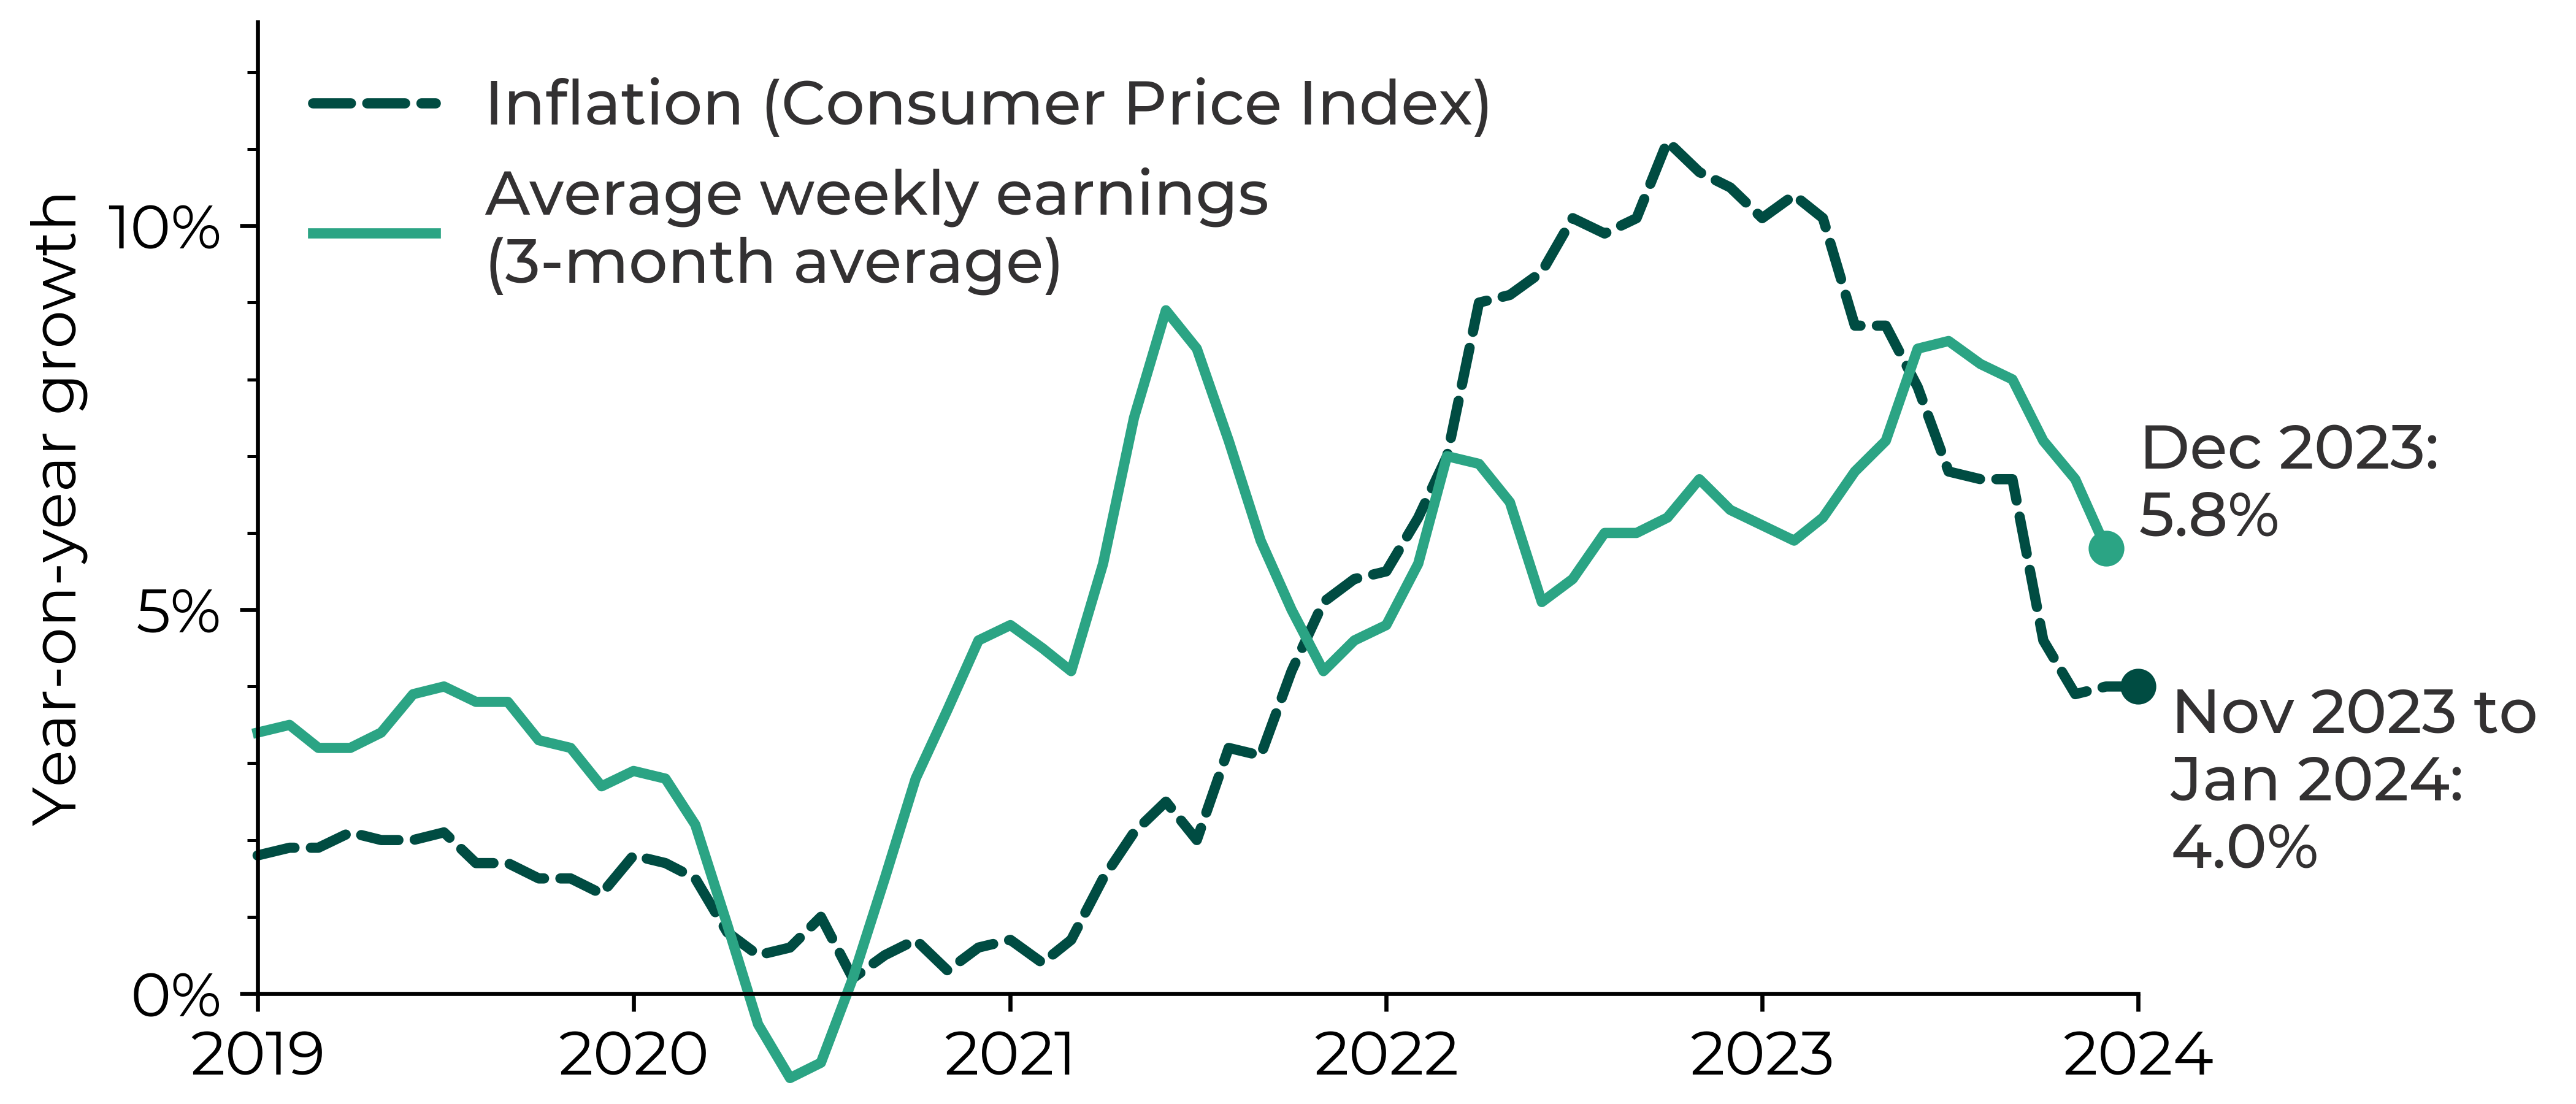 Graph showing UK inflation exceeding average weekly earnings (3-month average) in 2022-23. In December 2023, the average weekly earnings were 5.8% higher than for December 2022 whereas the Consumer Price Index inflation was at 4.0% in November 2023 to January 2024.